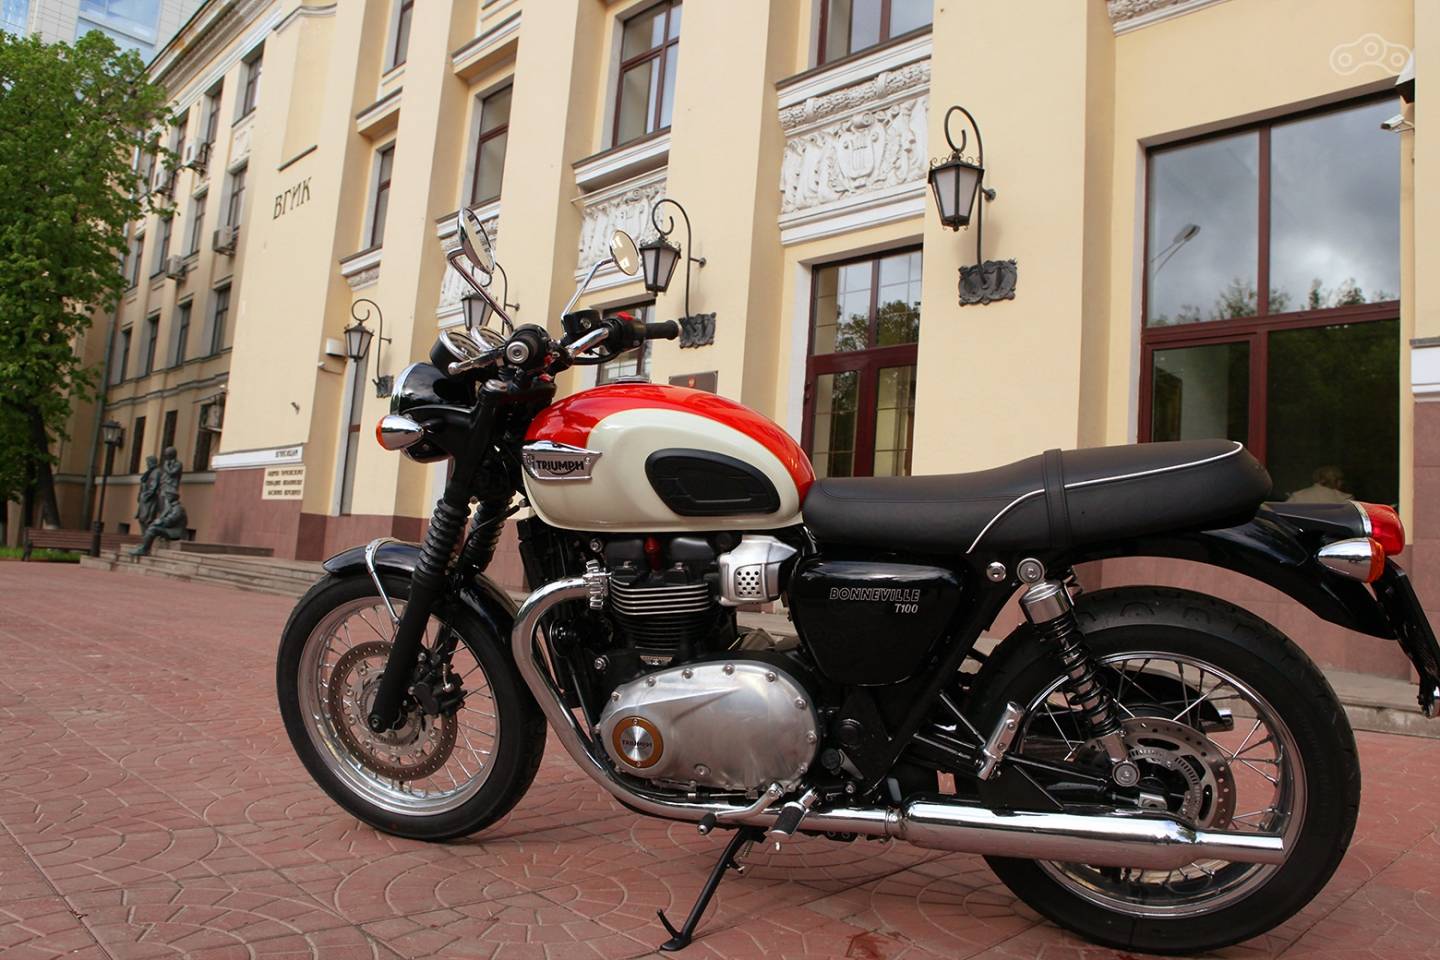 Triumph bonneville t100 vs triumph bonneville t120 - know which is better! - bikewale